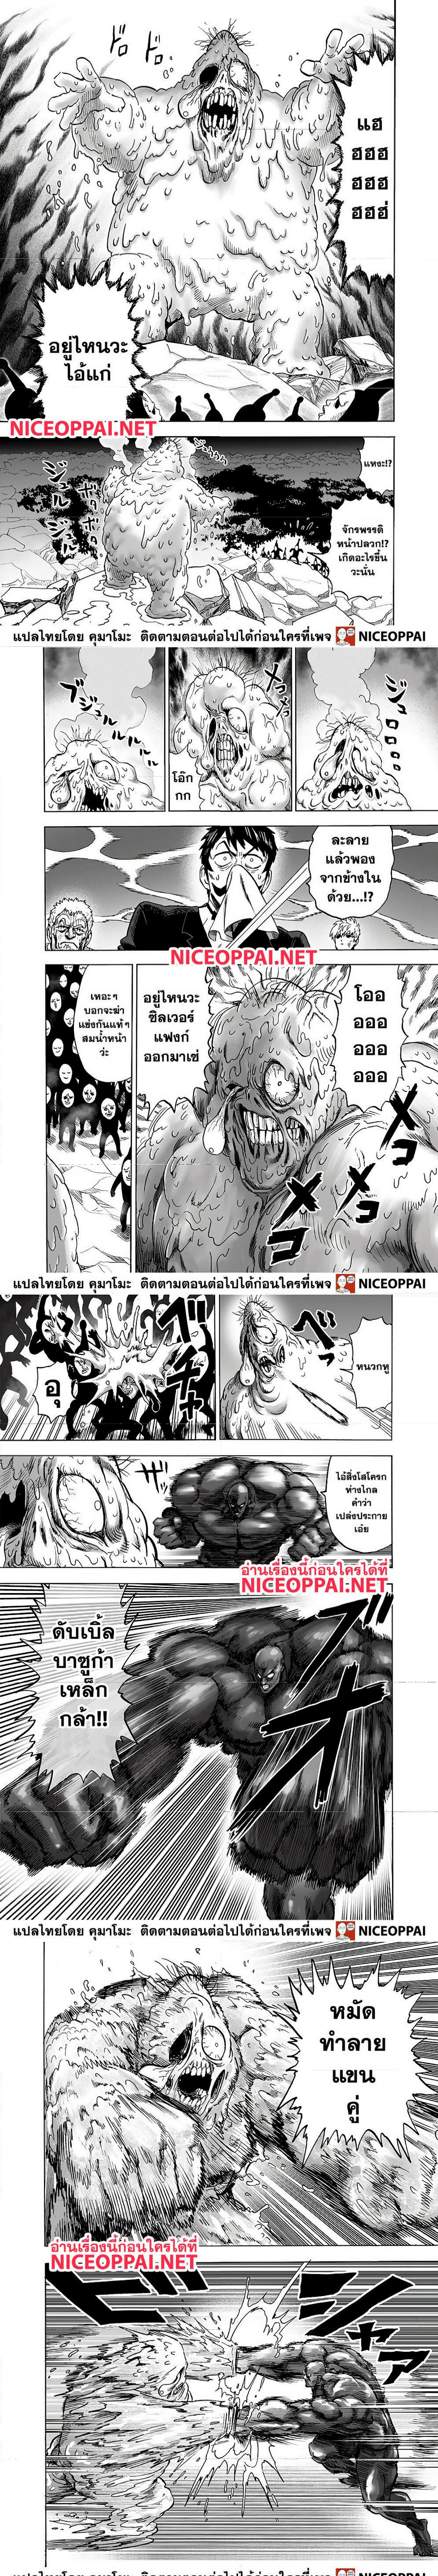 One Punch Man147 (5)